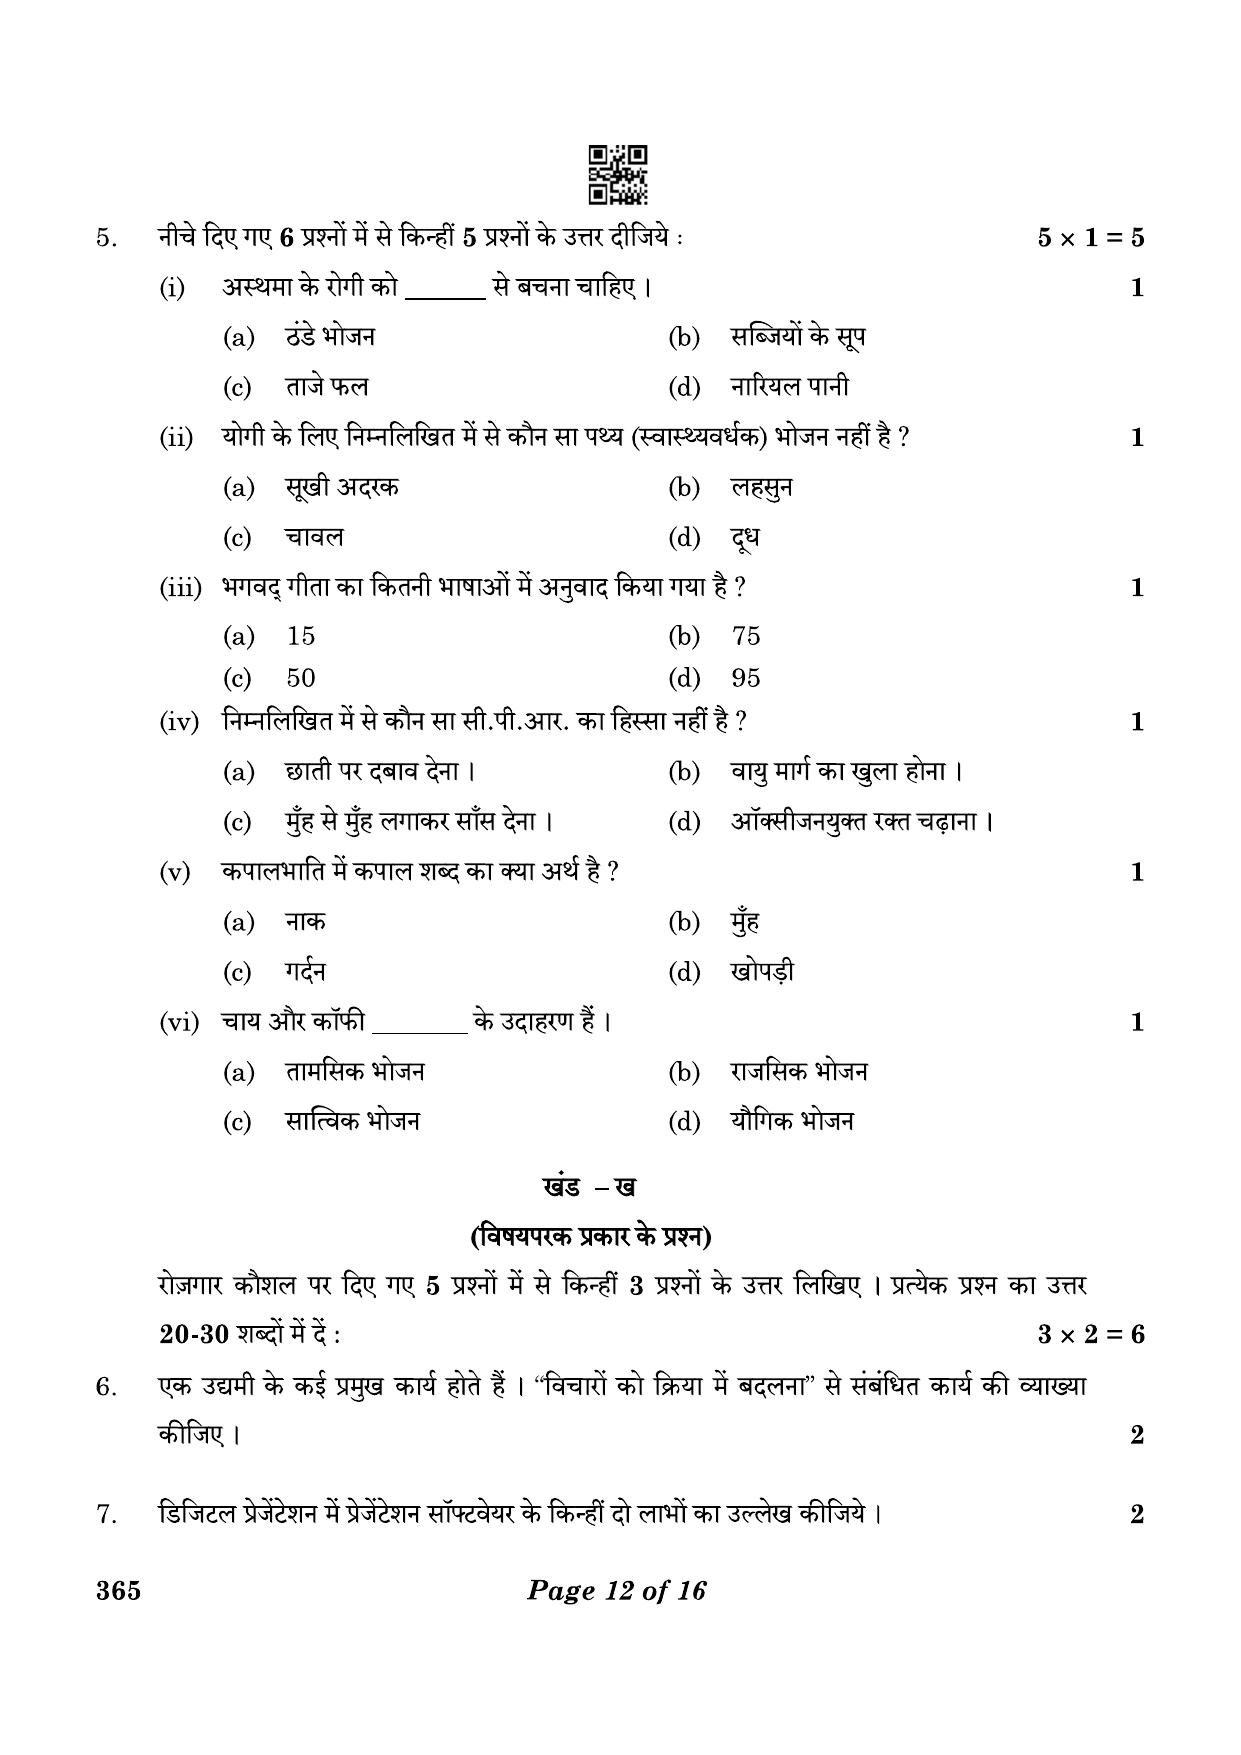 CBSE Class 12 365_Yoga 2023 Question Paper - Page 12